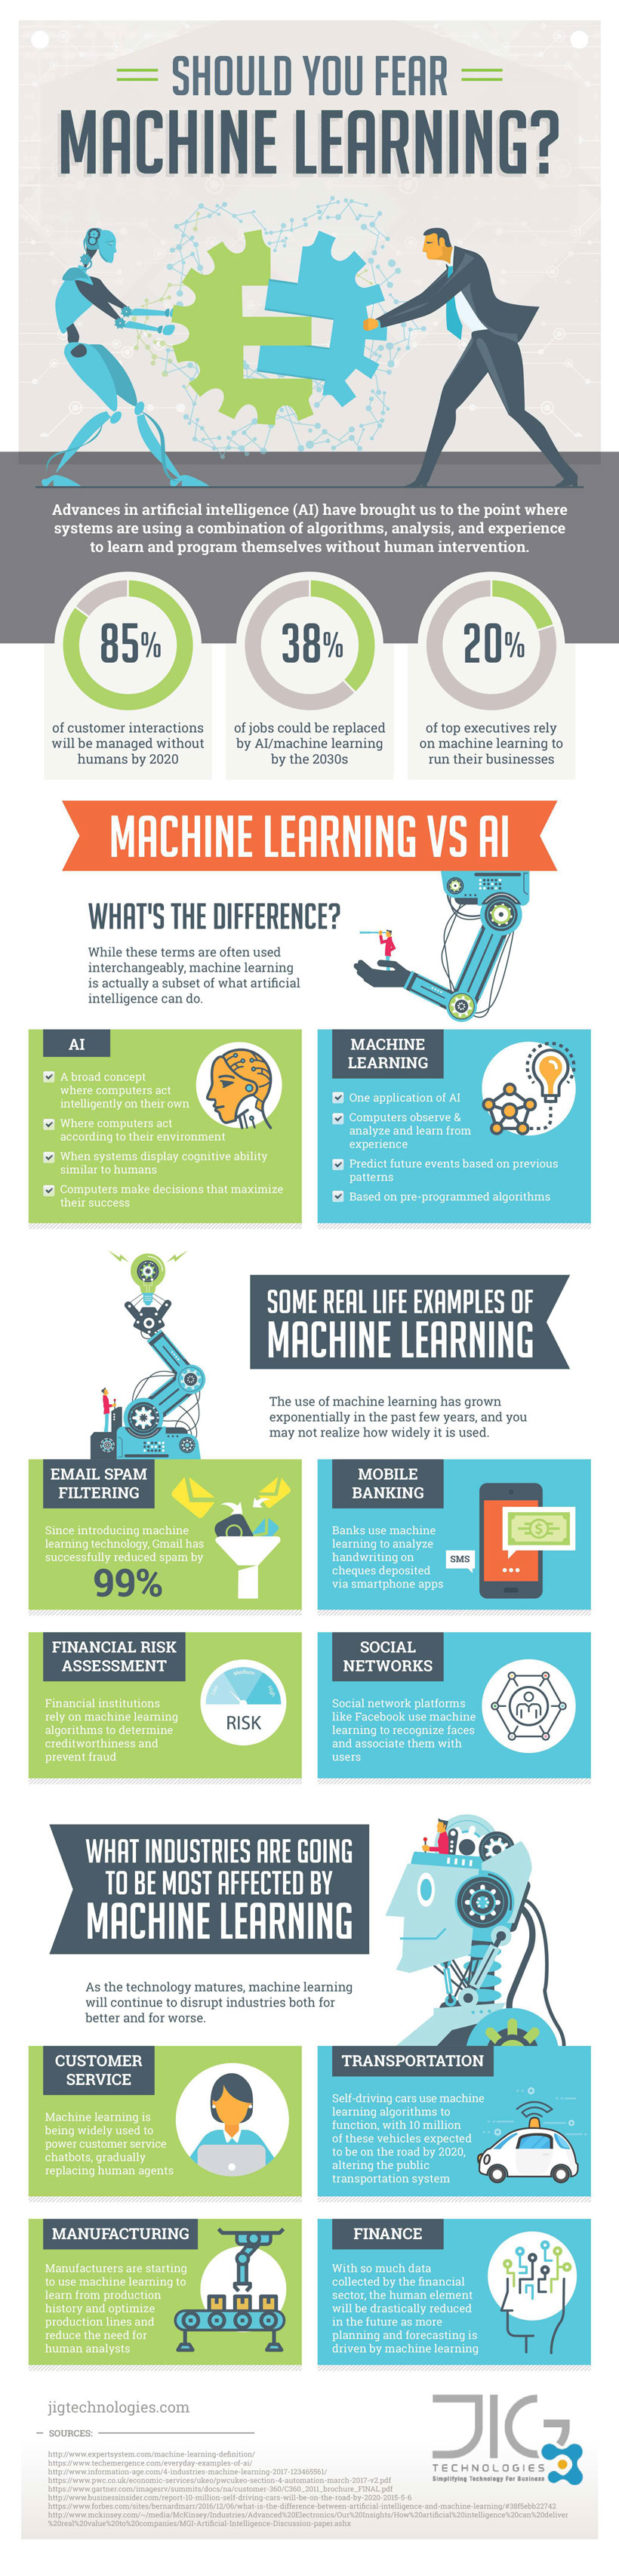 Machine-learning-infographic